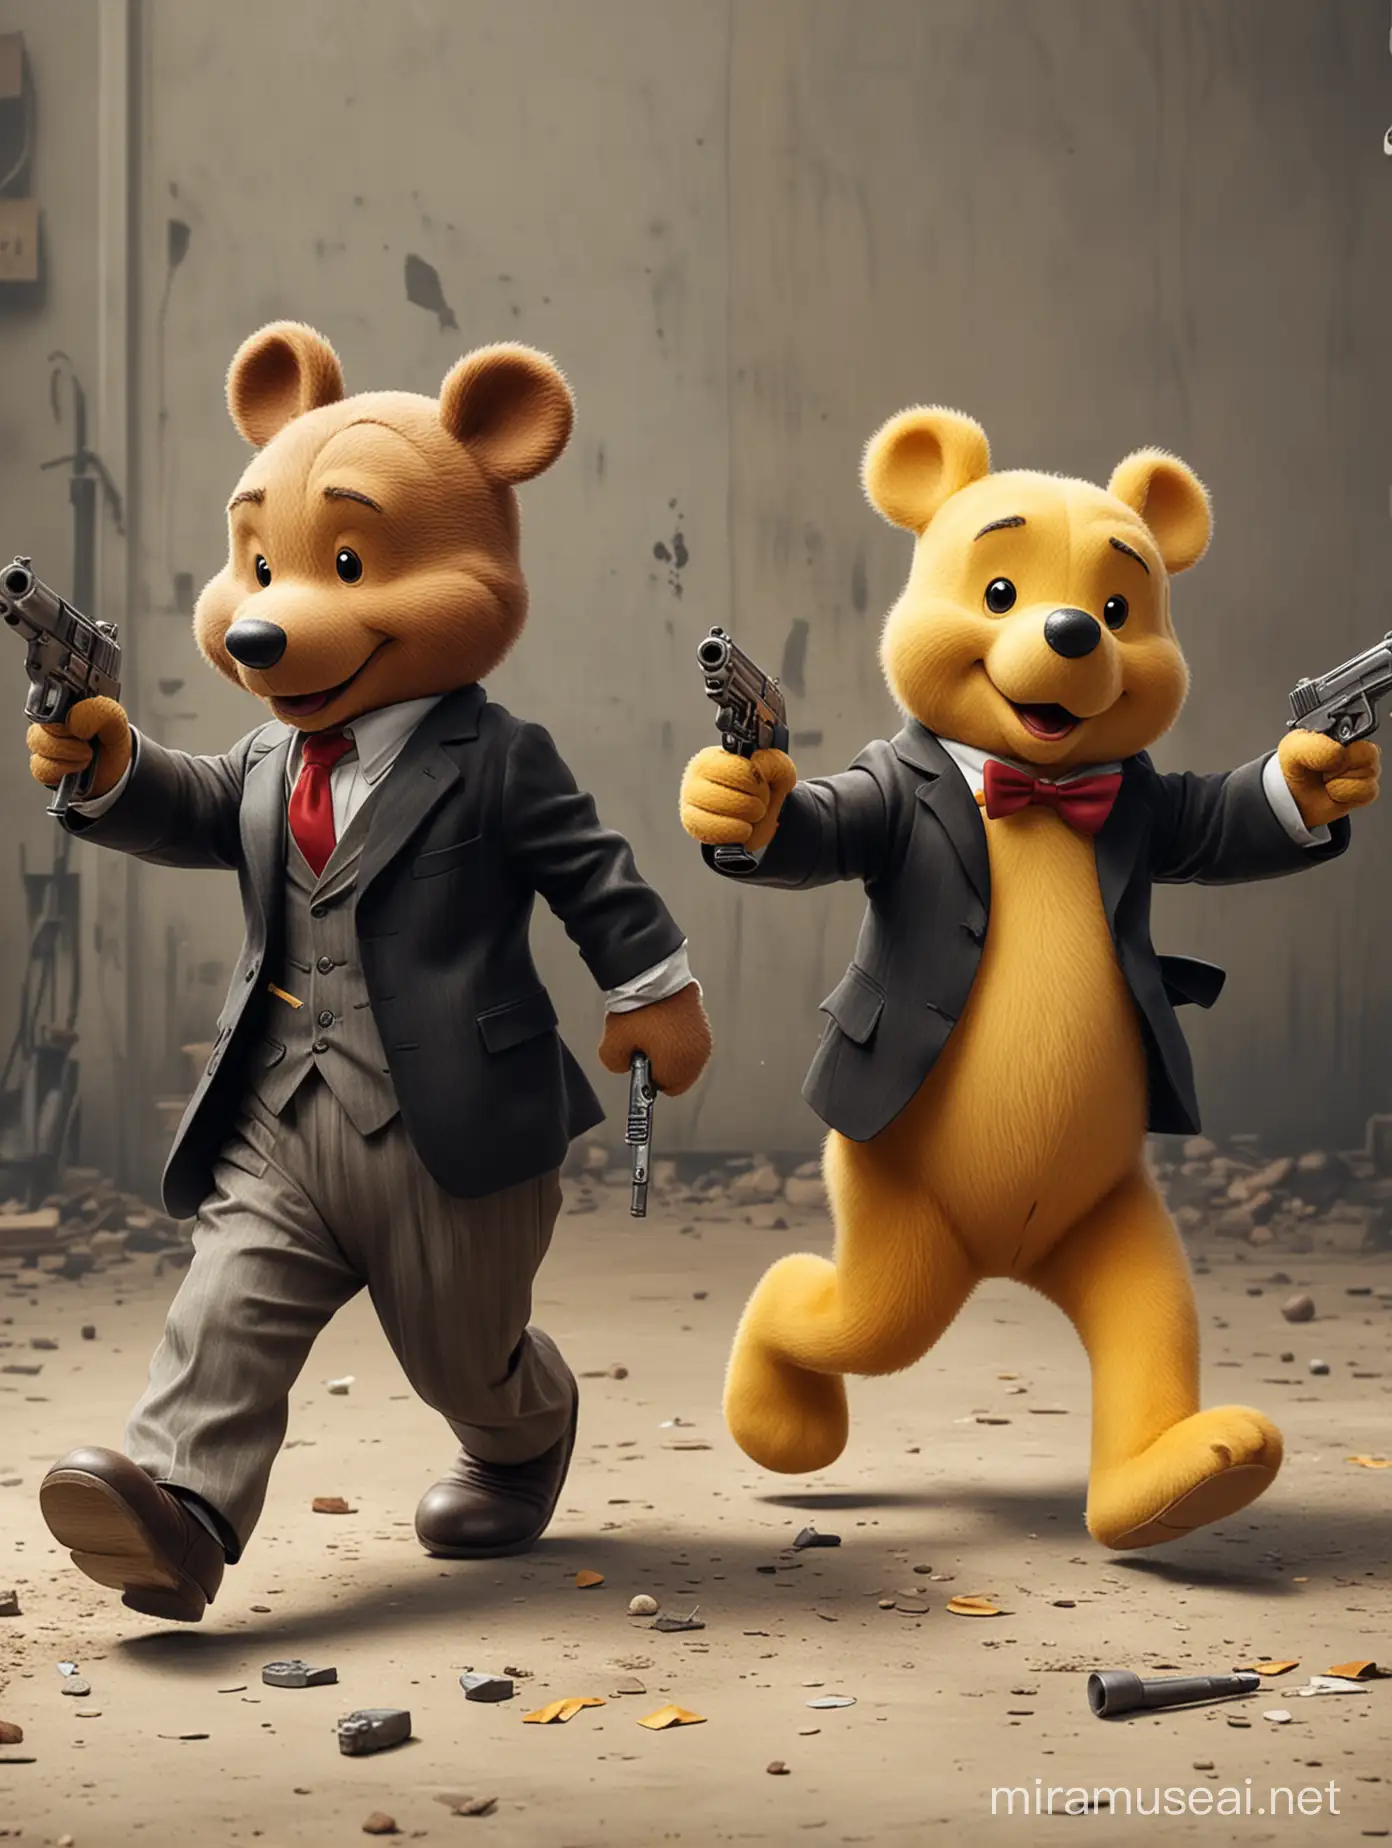 Mickey Mouse and Winnie the Pooh in Elegant Suits Fleeing Bank Robbery